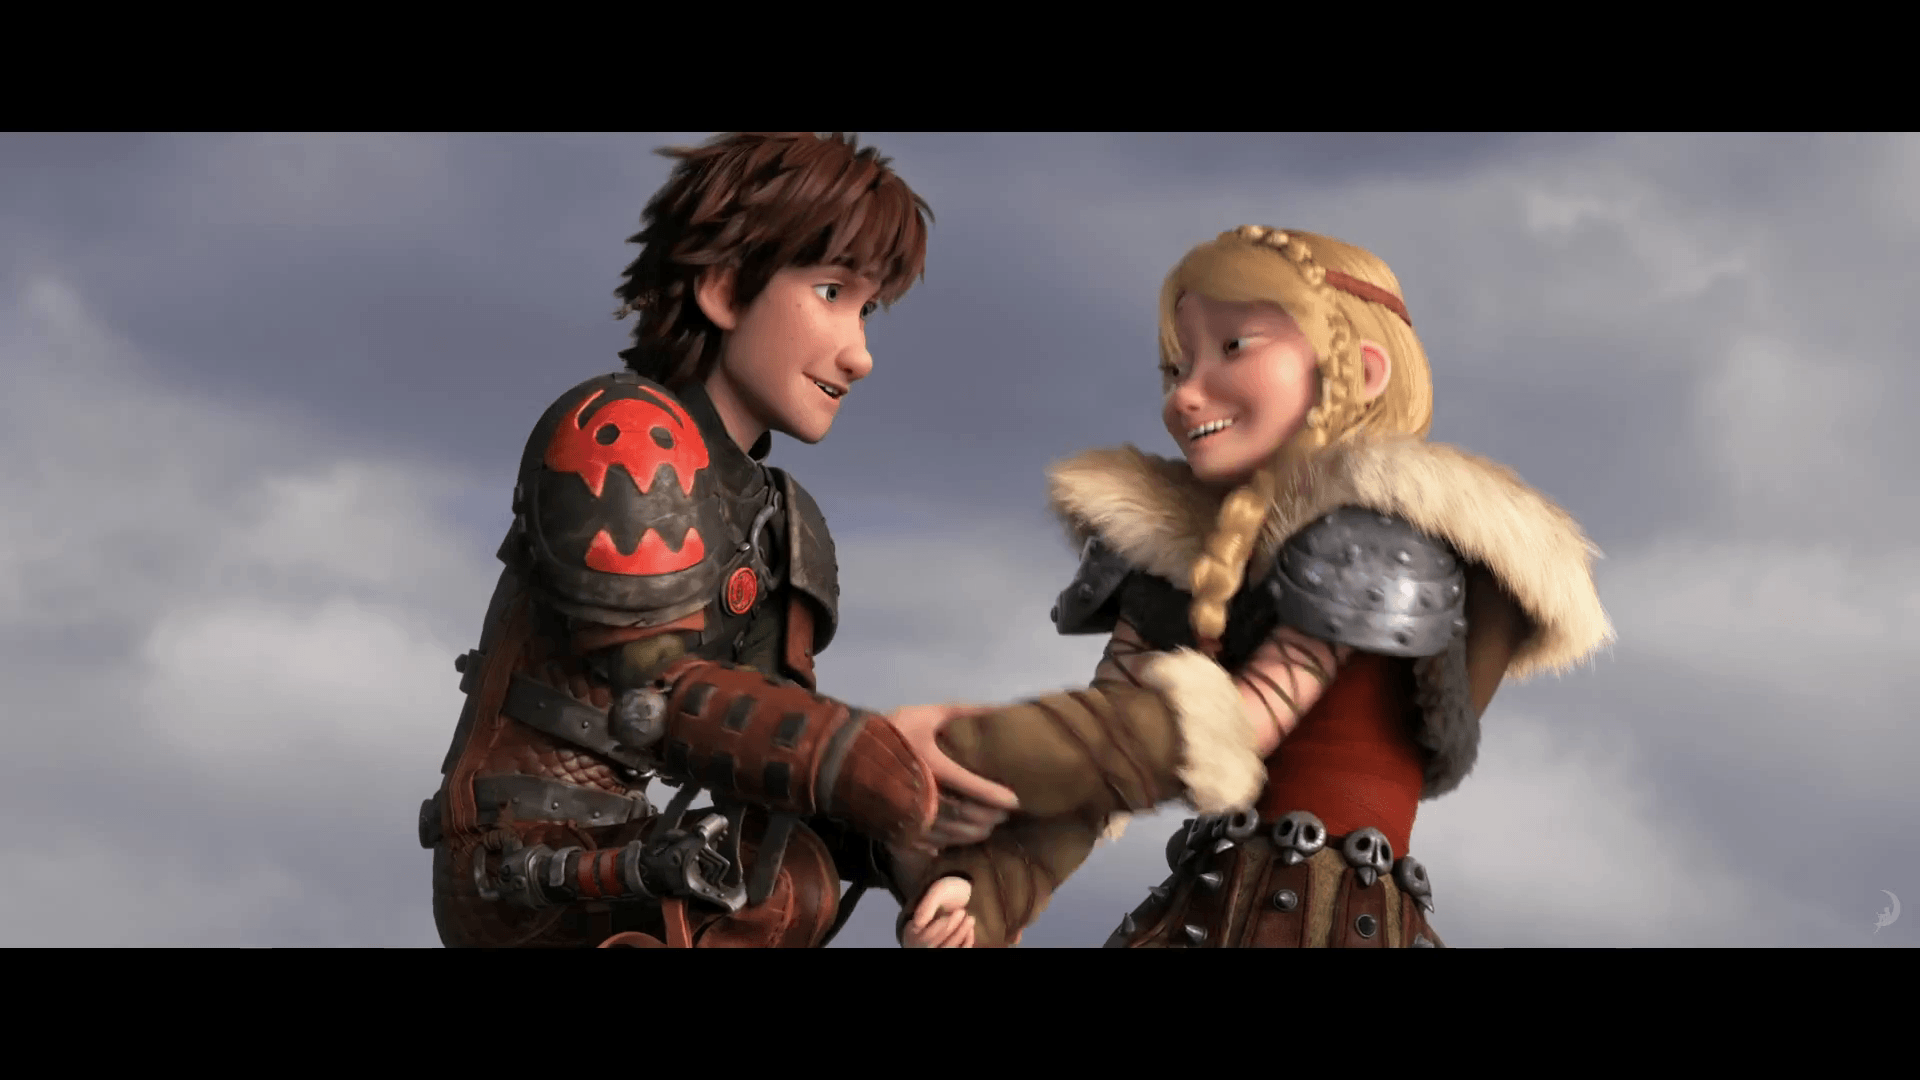 how to train your dragon wallpaper astrid